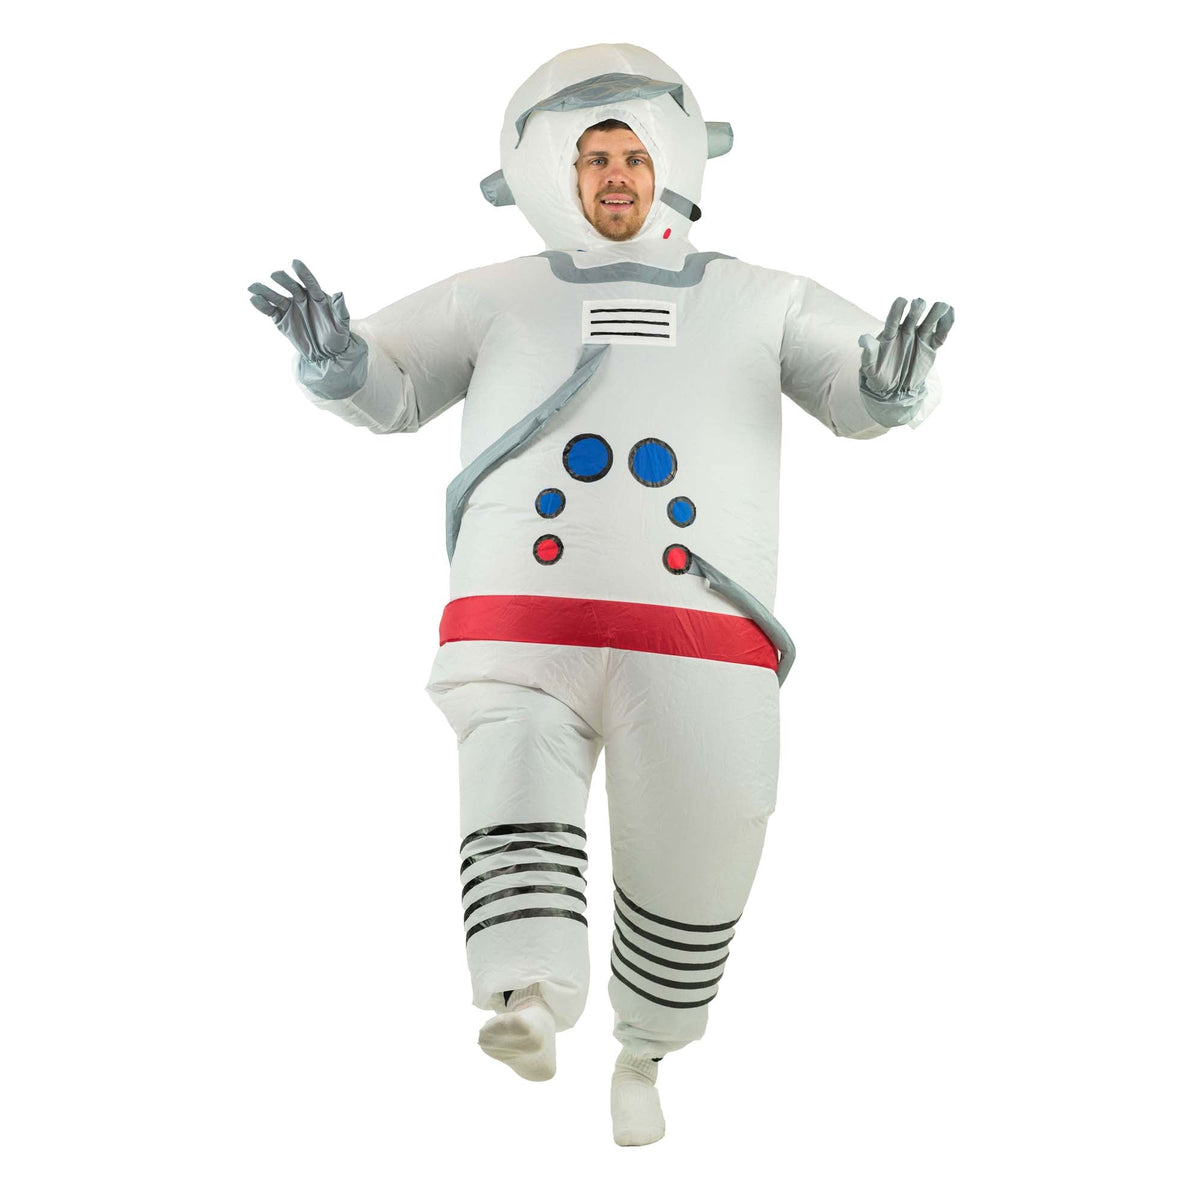 BODYSOCKS Costumes Inflatable Spaceman Costume for Adults